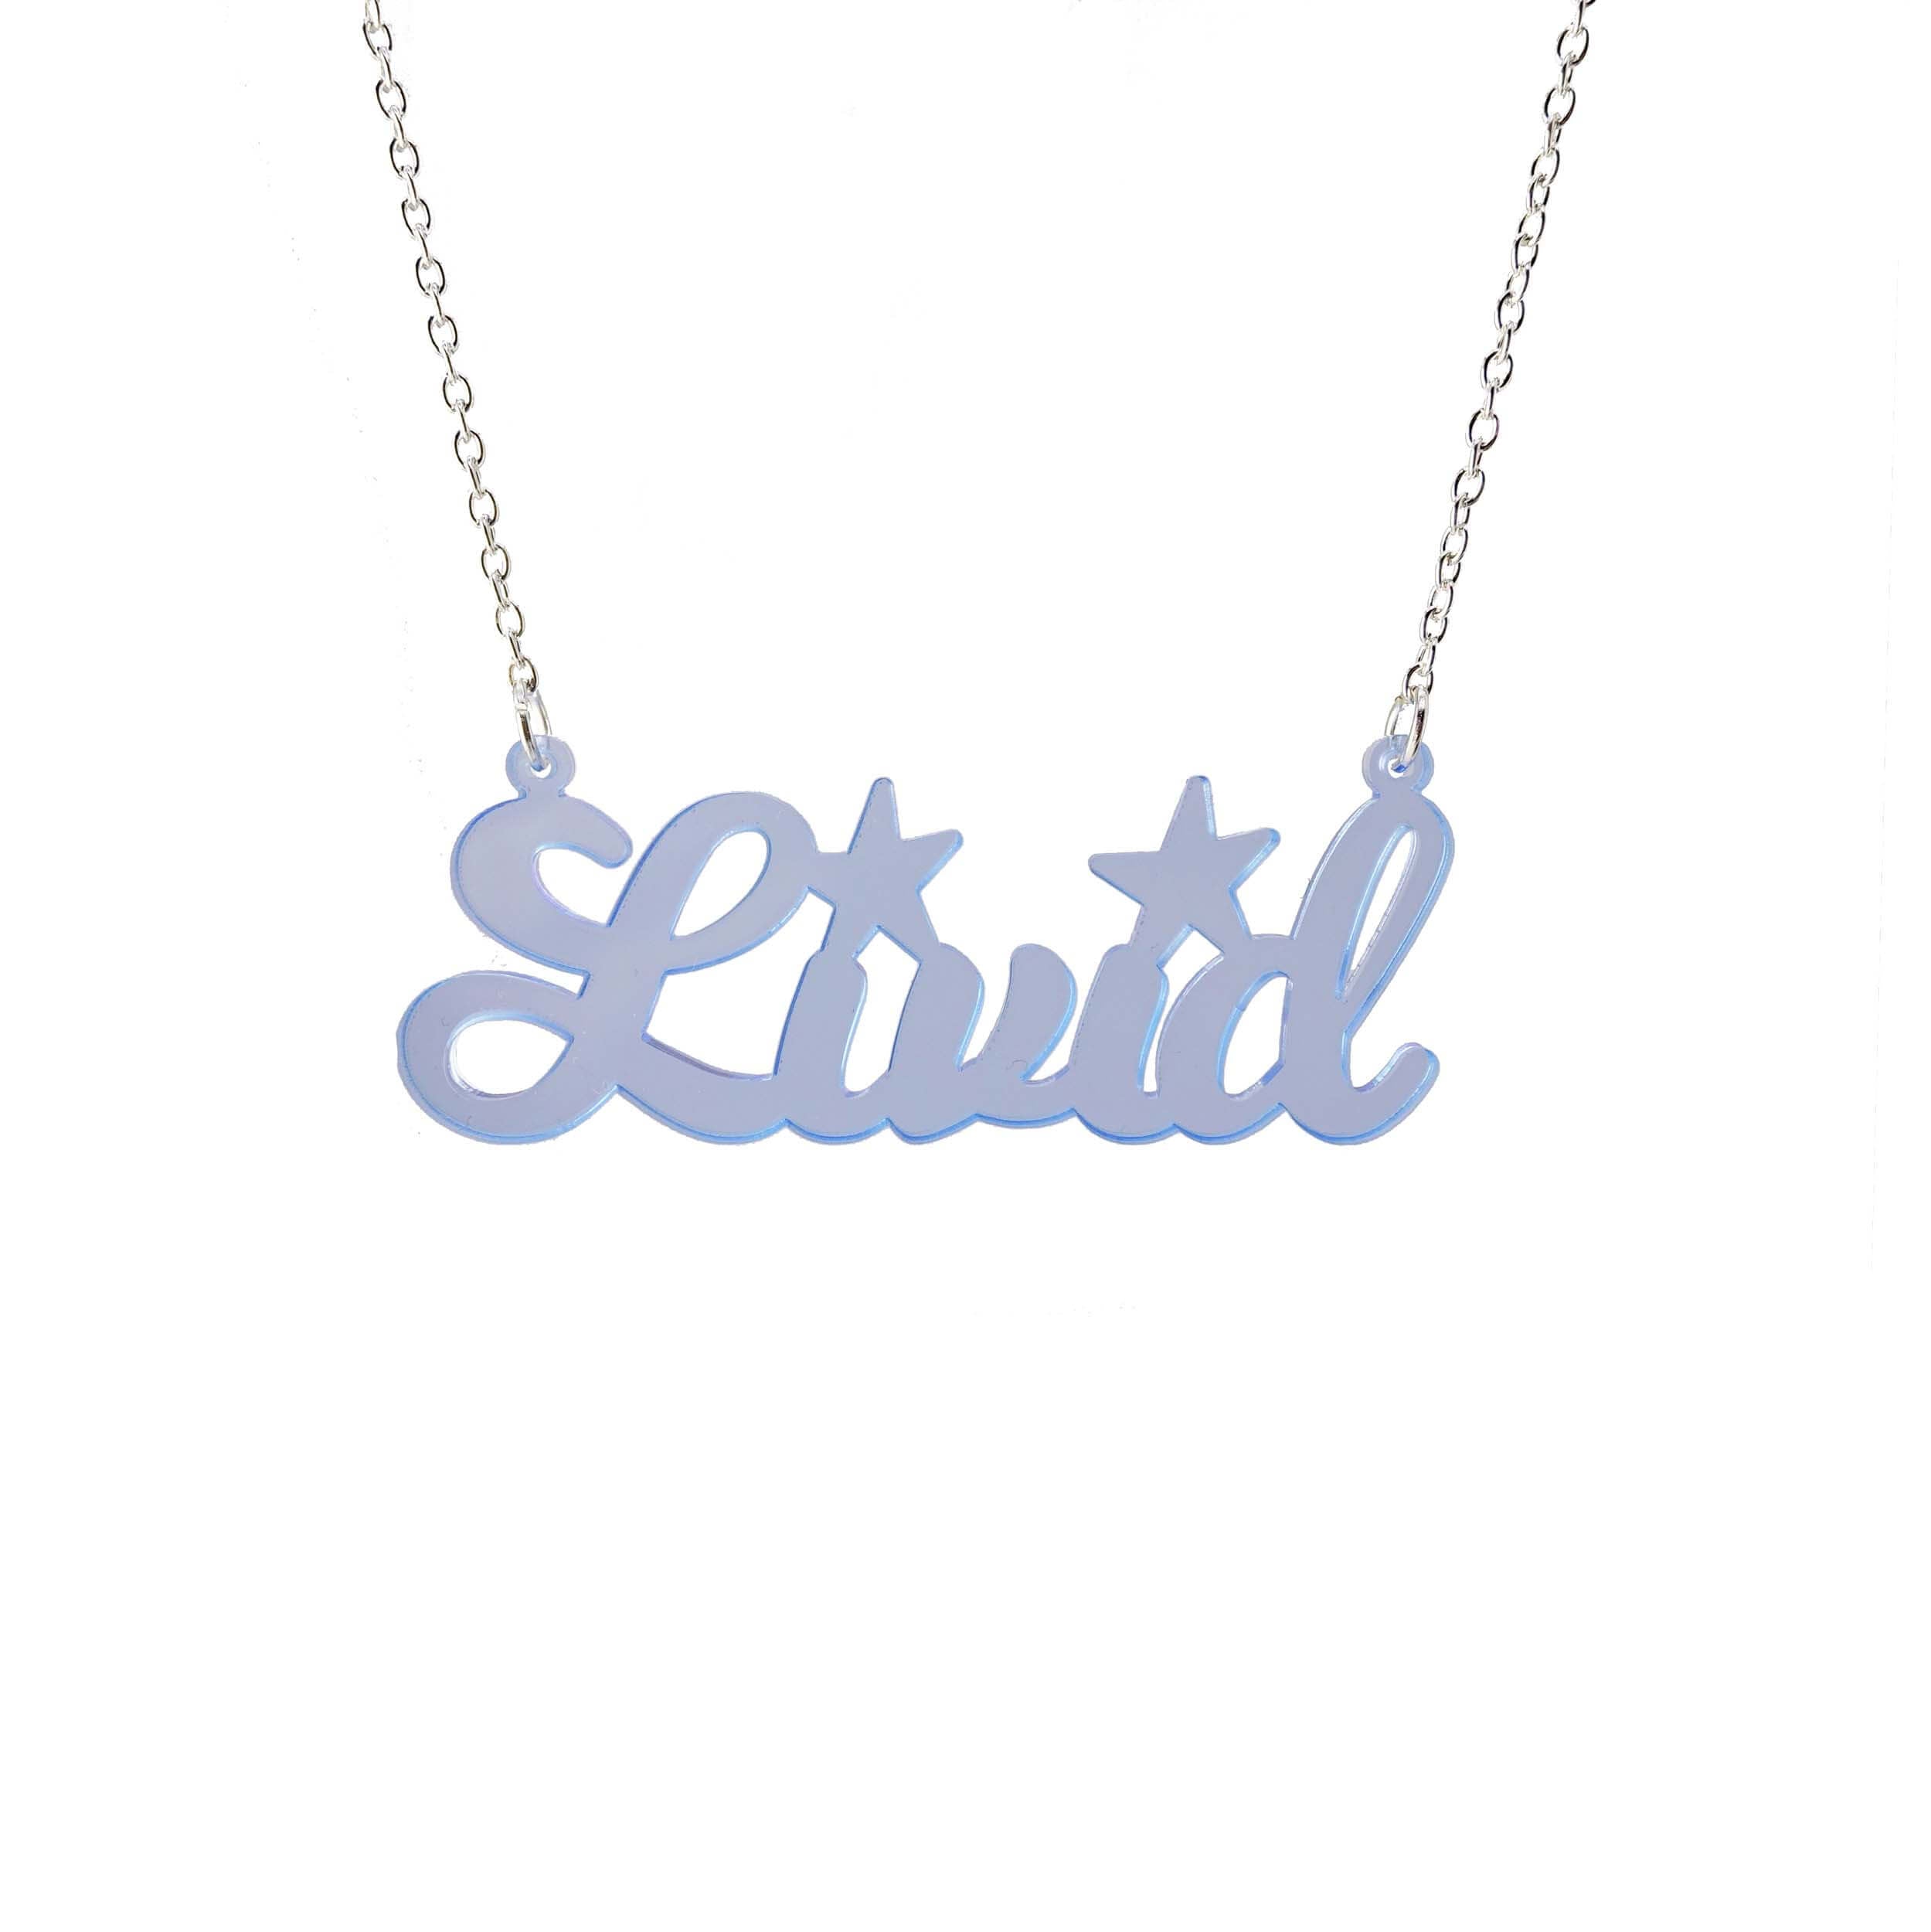 Livid necklace in ultraviolet shown hanging on a white background. 